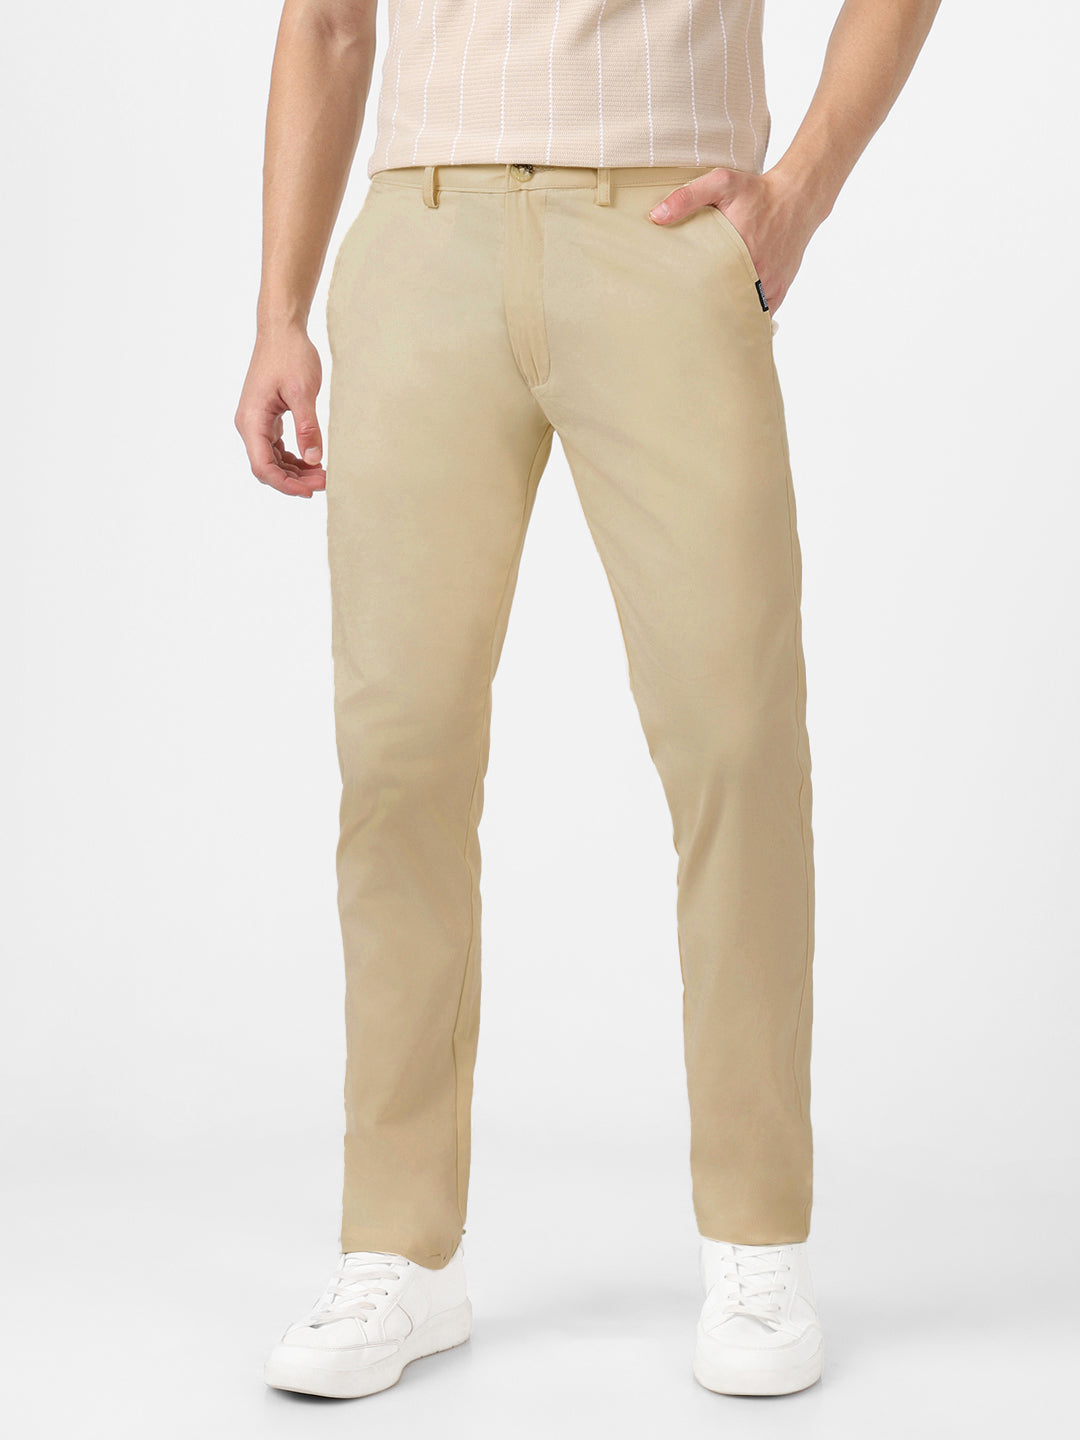 Men's Cream Cotton Light Weight Non-Stretch Slim Fit Casual Trousers